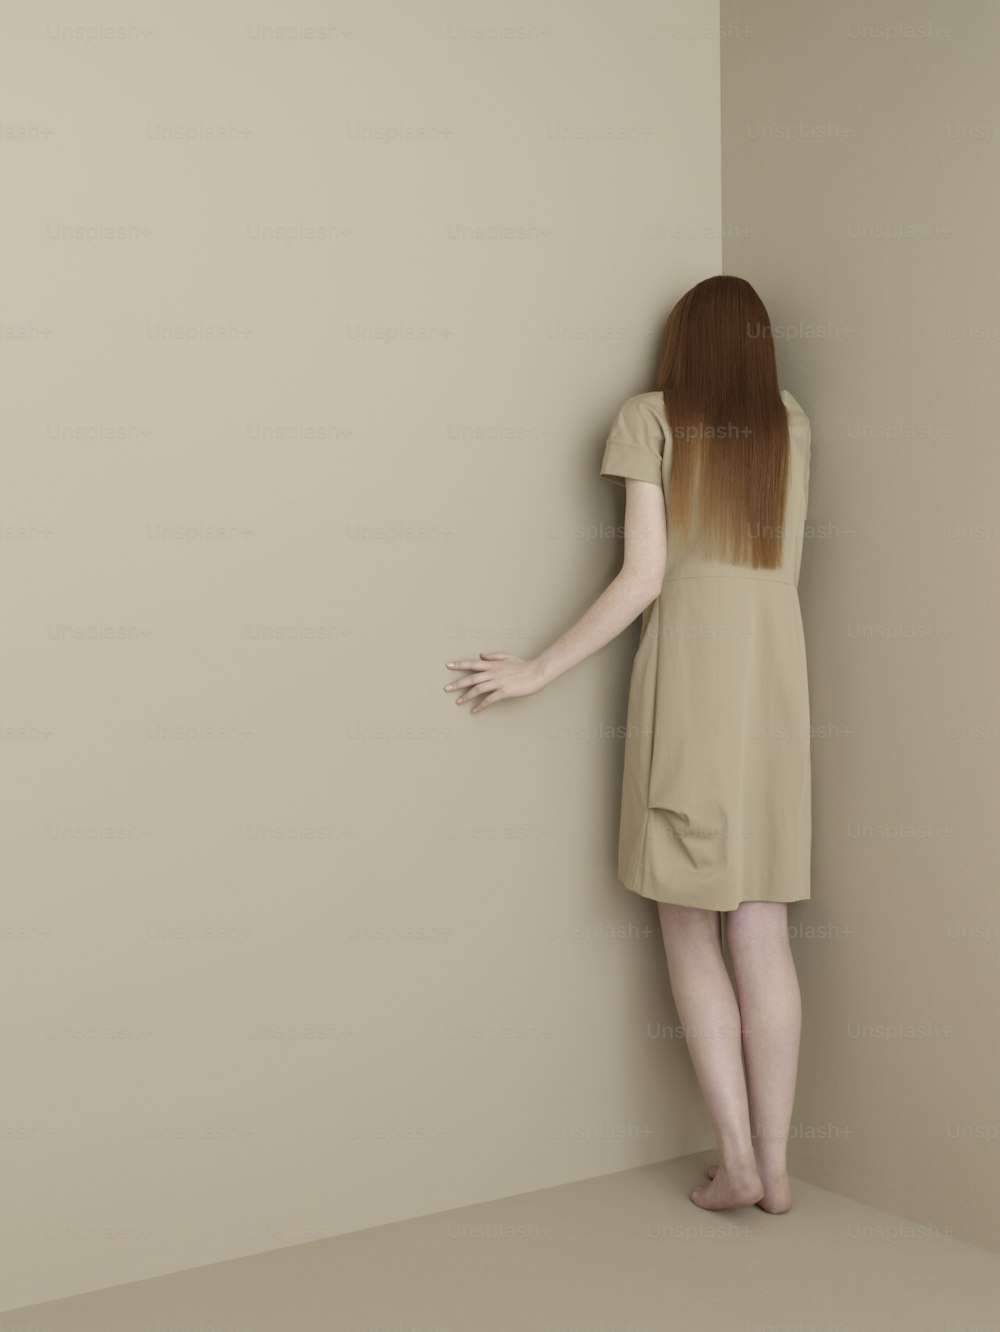 a woman in a short dress is leaning against a wall